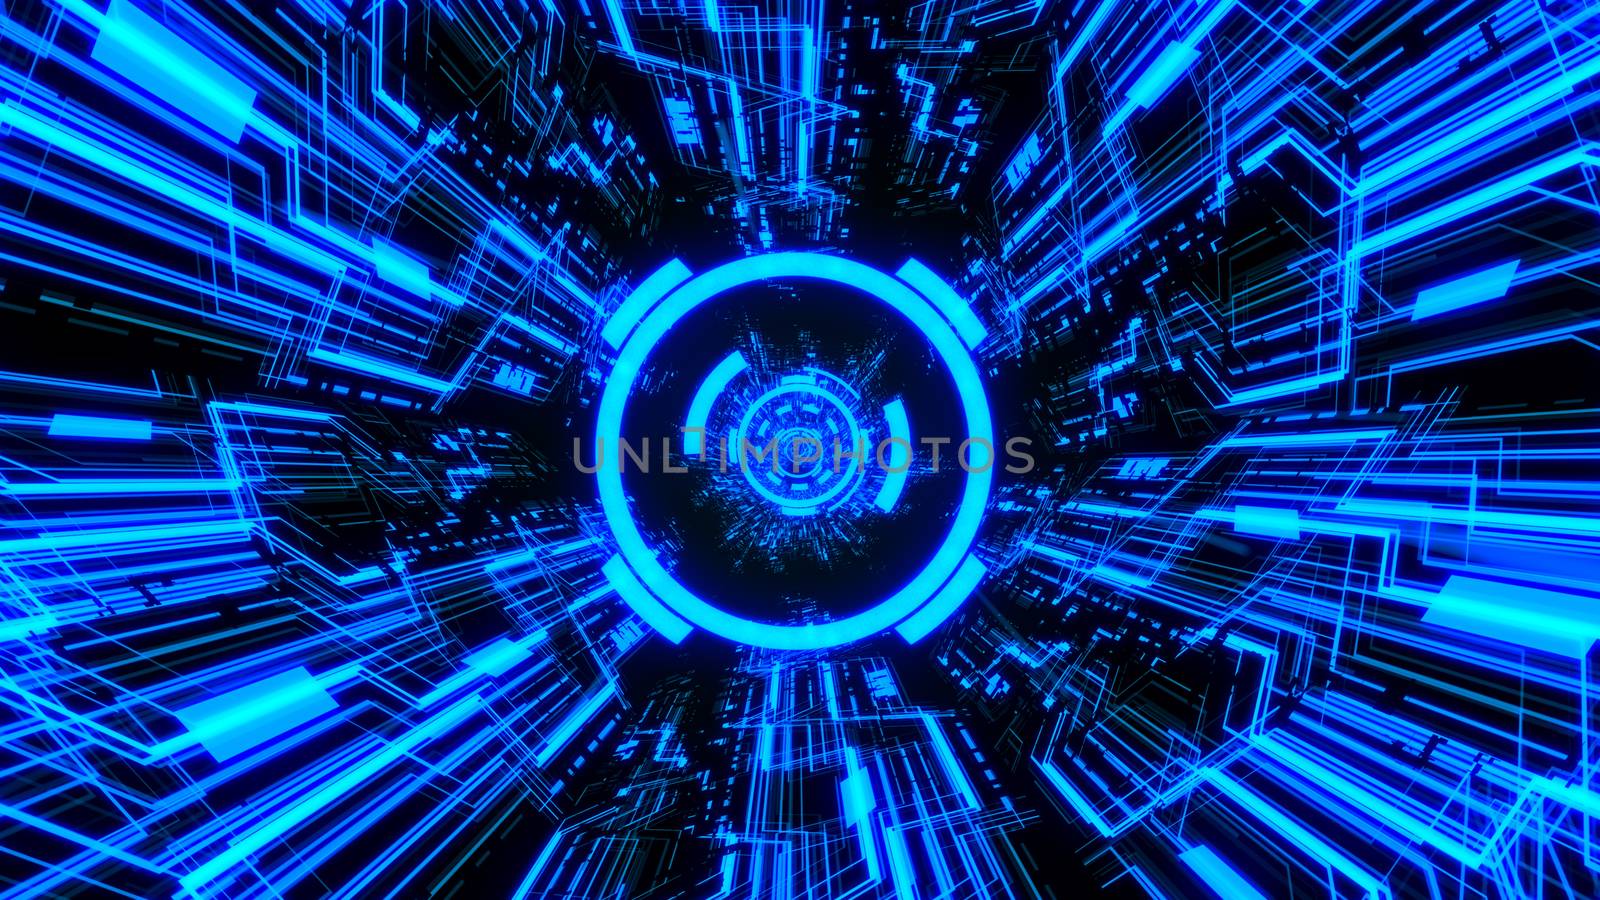 3D Digital Circuit System Tunnels and Waves with Digital Circles in the middle in Blue color theme Background Ver.2 by ariya23156